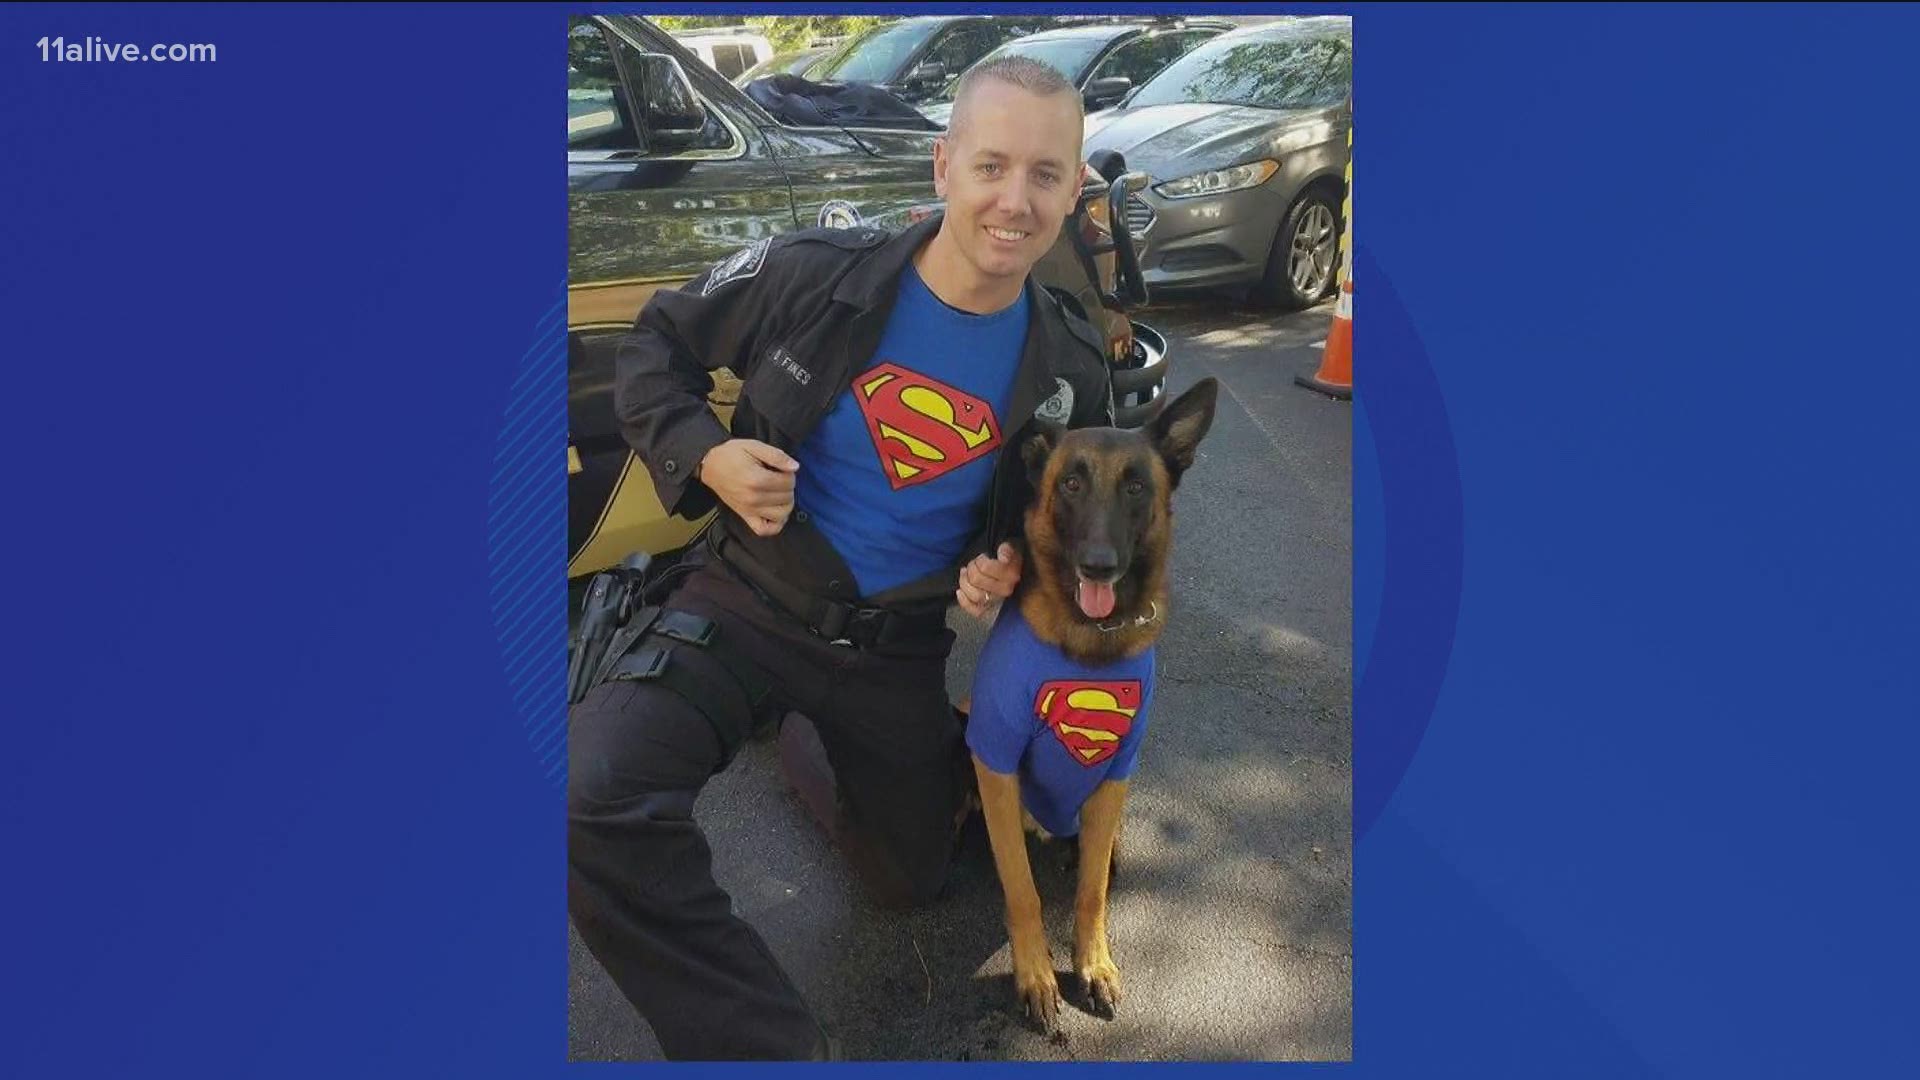 The 10-year-old retired police K-9 has had a storied carrier with the Brookhaven Police Department.